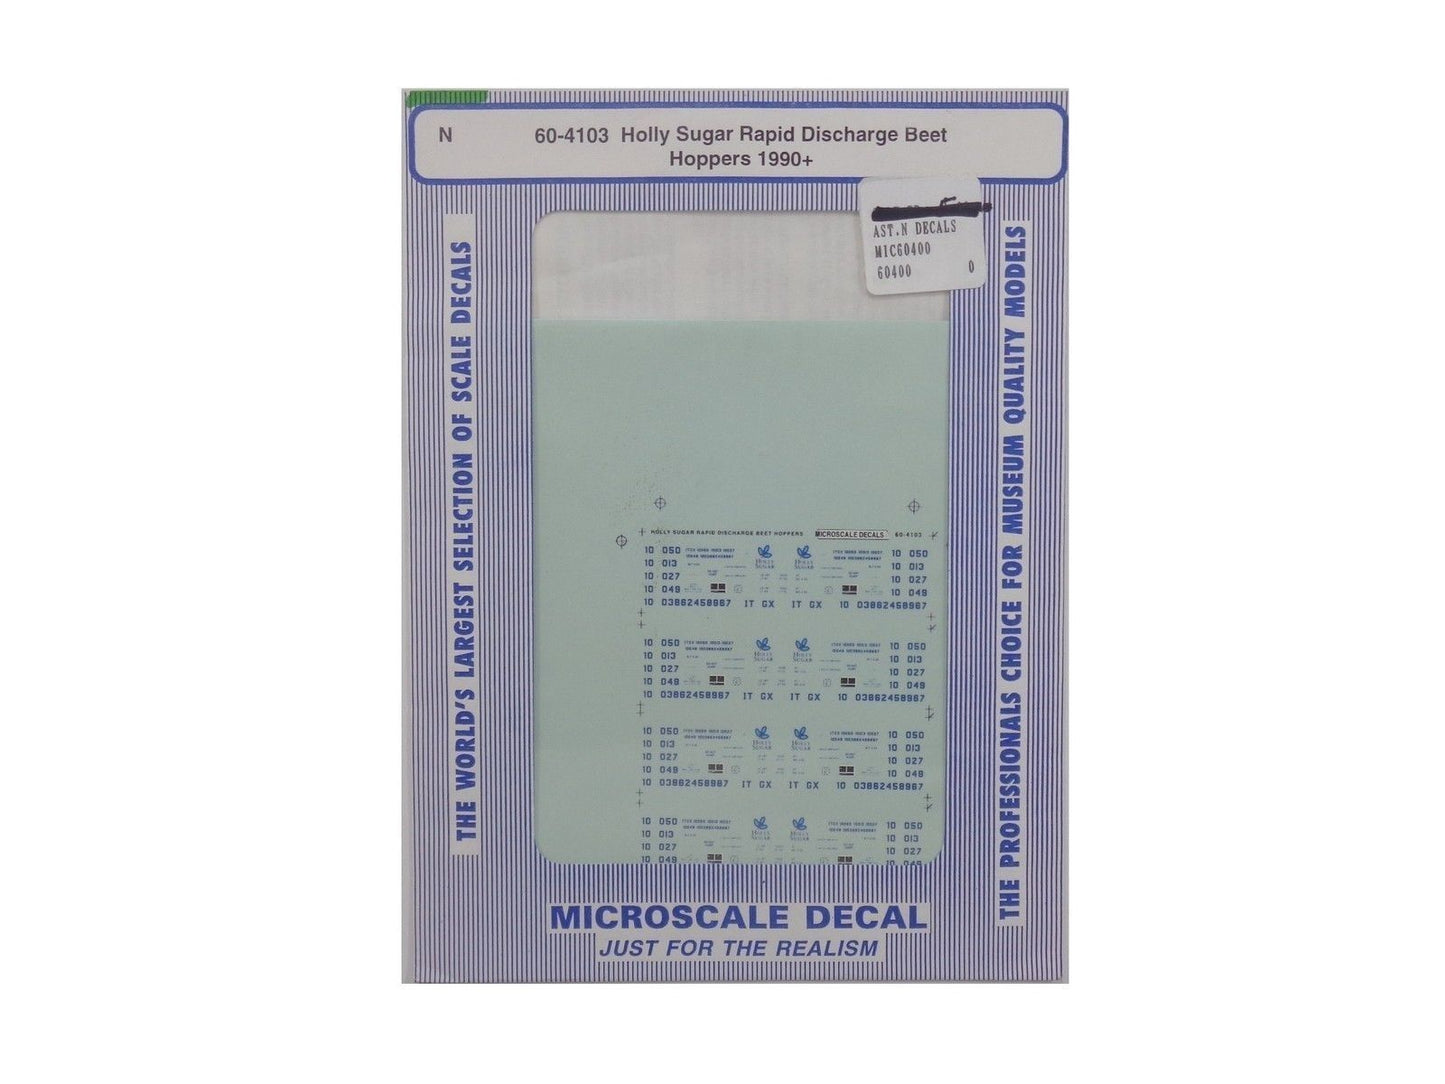 Microscale 60-4103 N Holly Sugar Rapid Discharge Beet Hoppers Decal Sheet